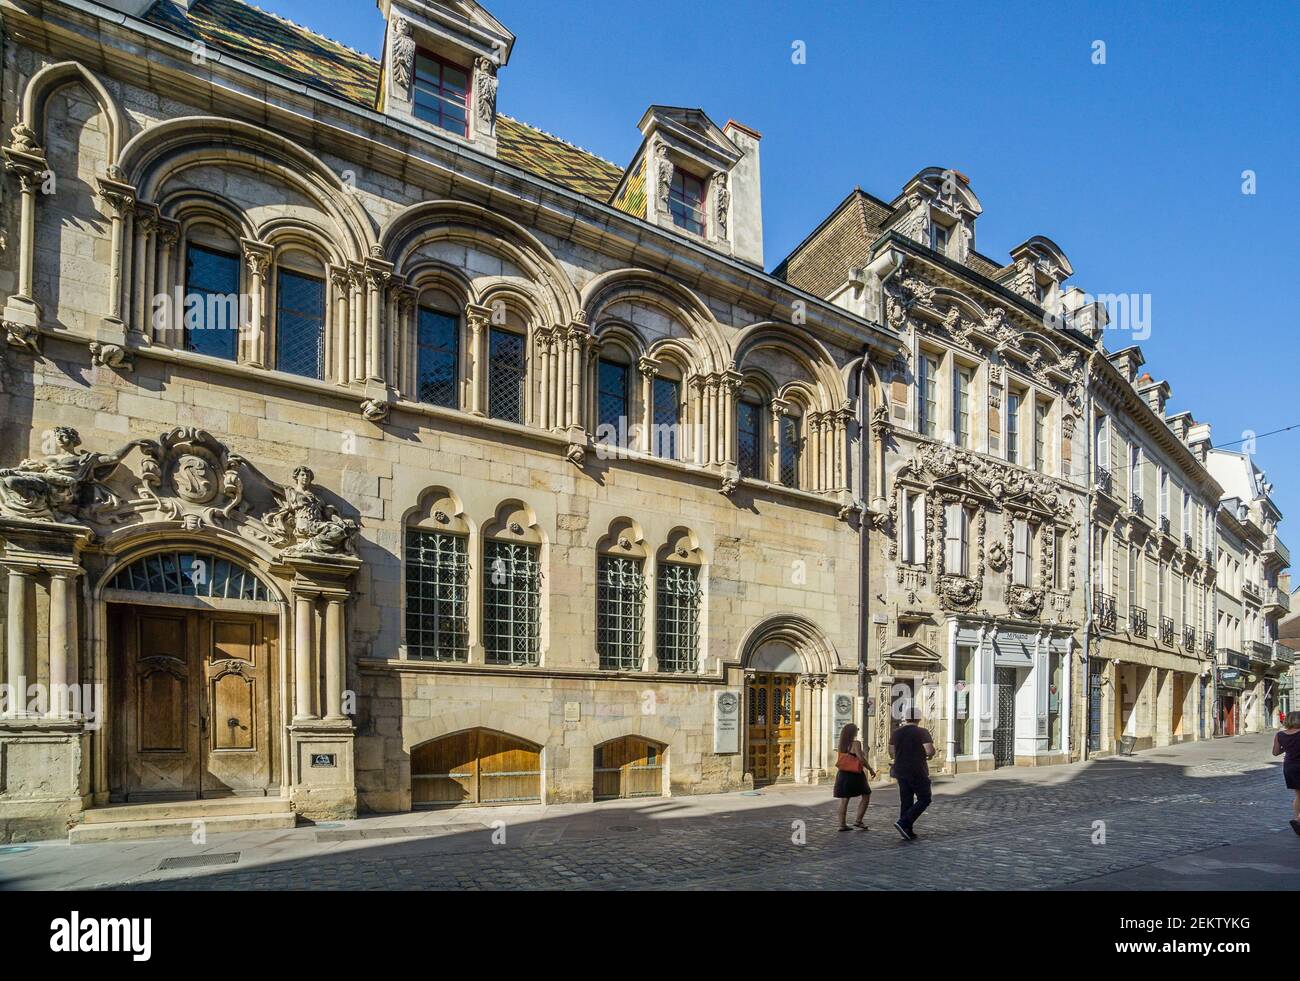 the richly sculptured facades of 18th century mansion of Hôtel Aubriot and Maison Maillard in Rue de Forges, Dijon, Burgendy, Côte-d'Or department, Bo Stock Photo